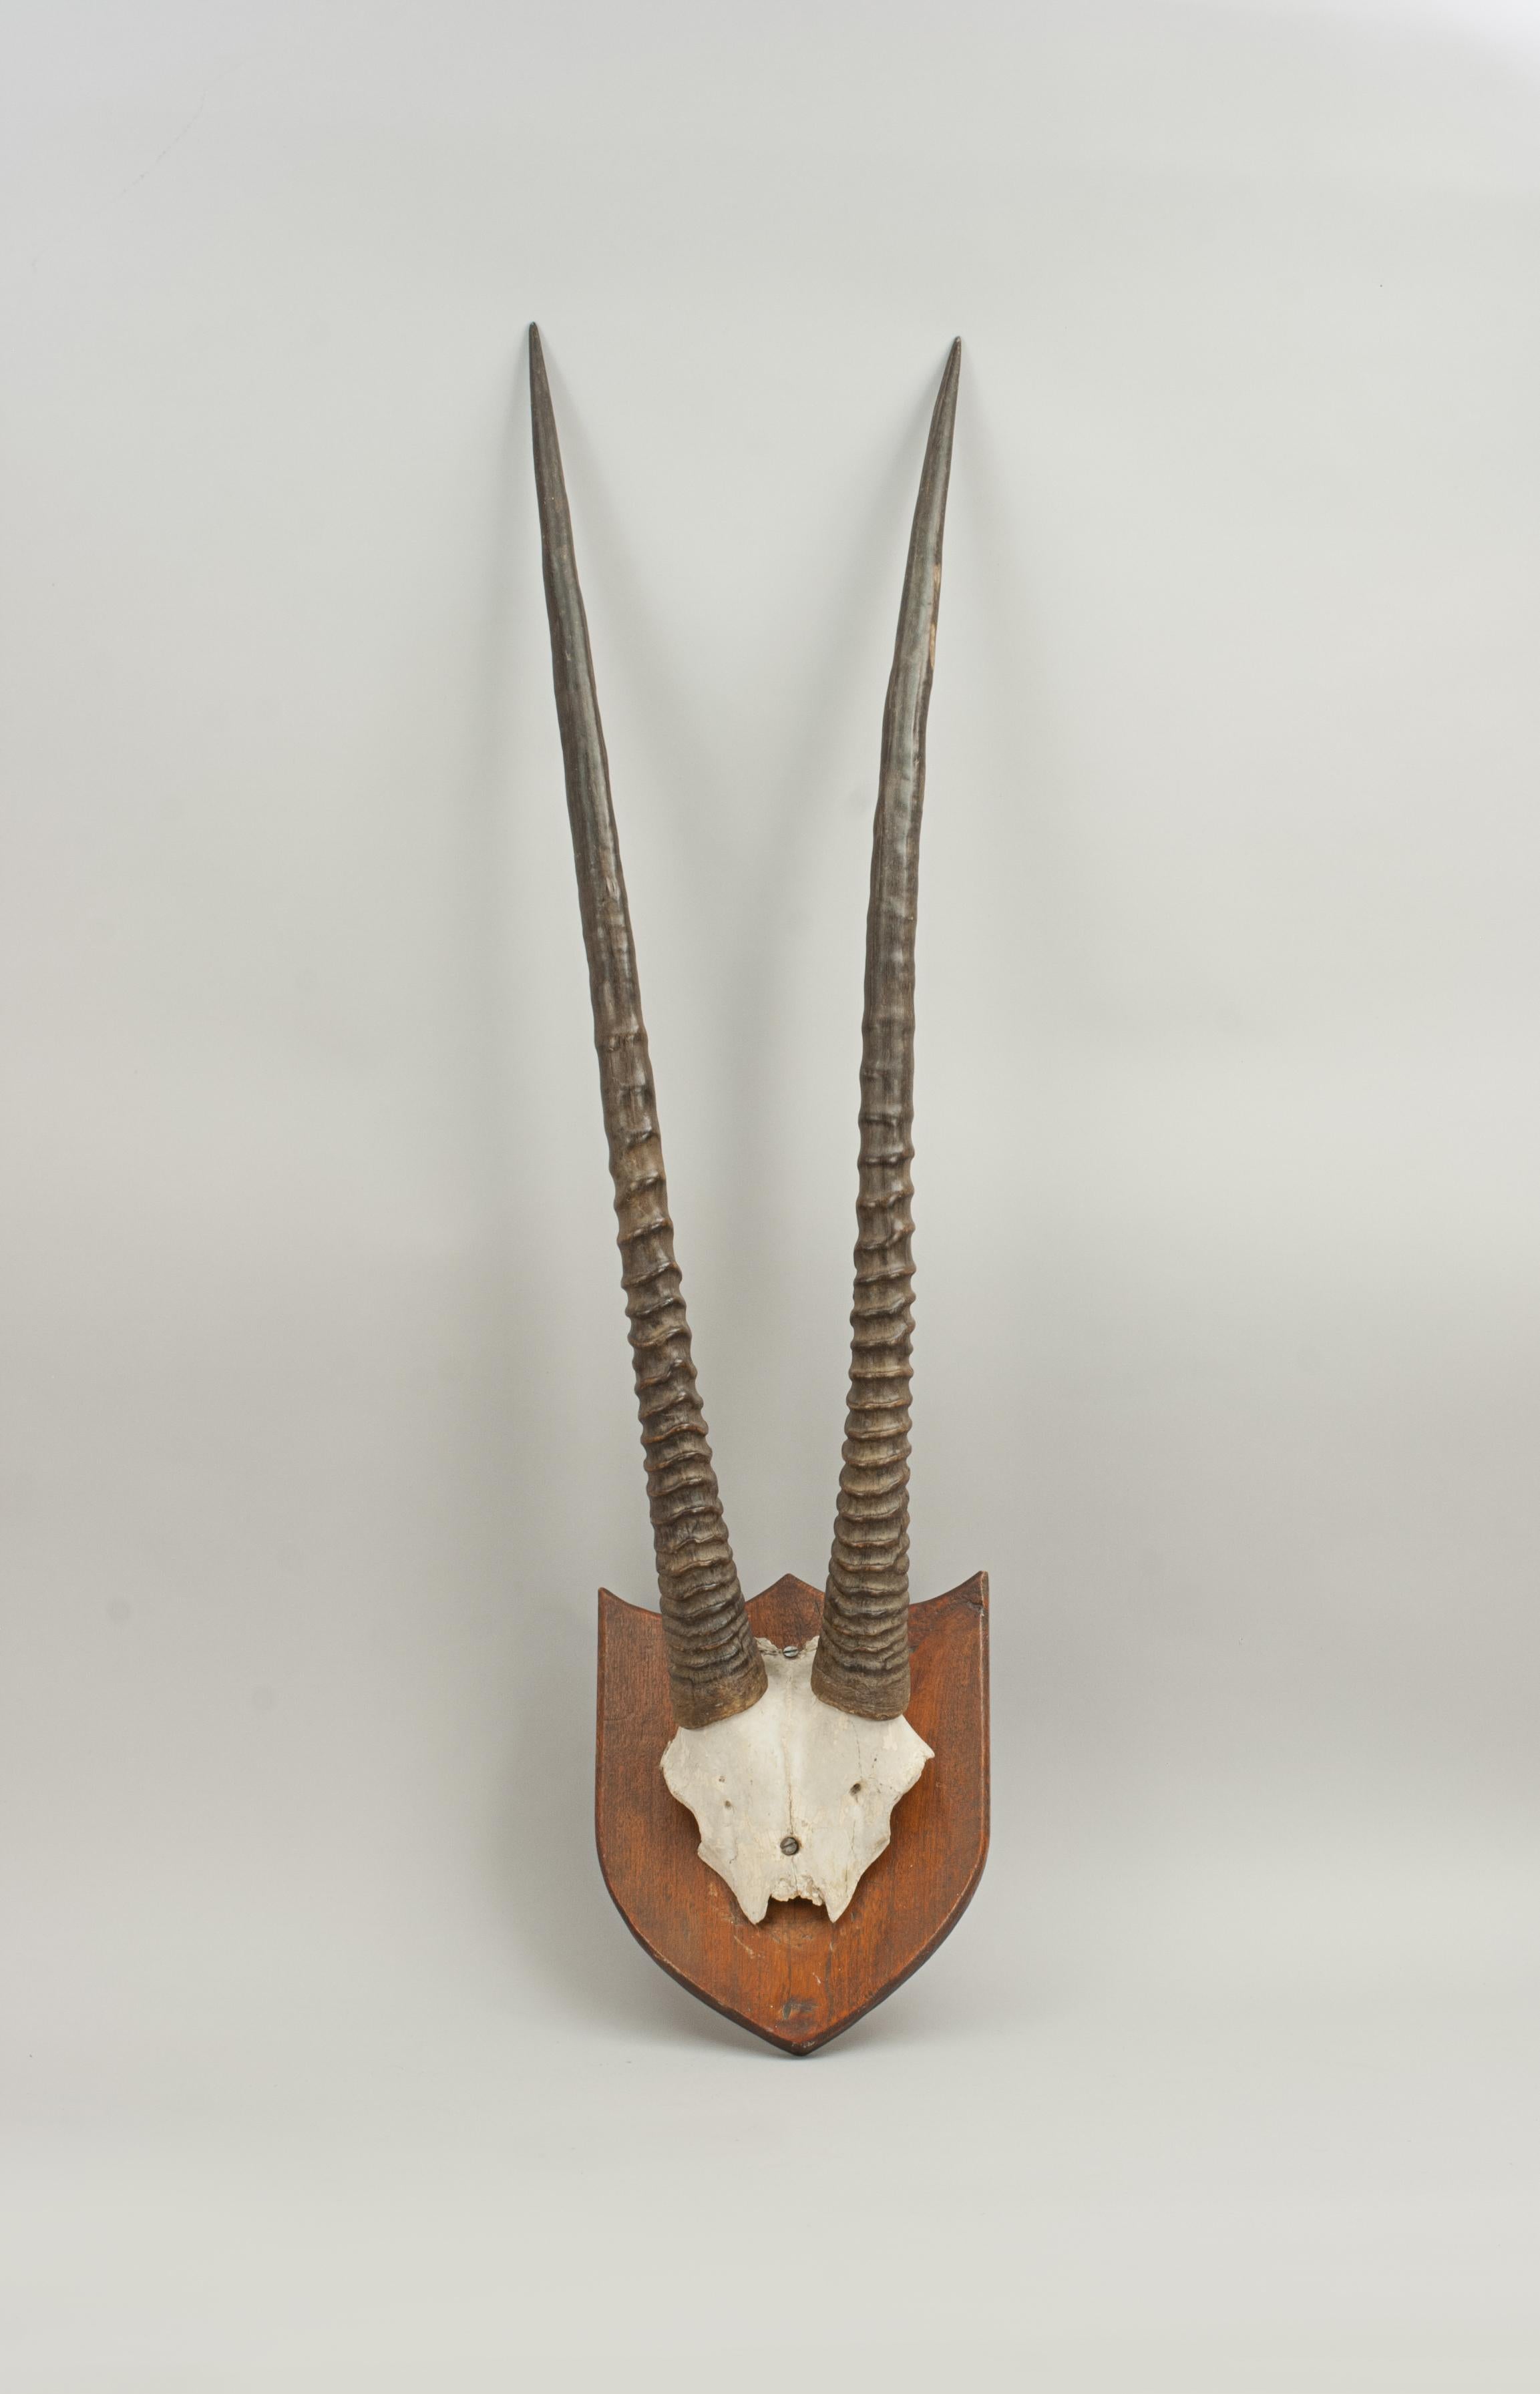 Beisa Oryx Horns.
A well prepared set of mounted Beisa Oryx horns with skull cap fixed to a shaped teak shield. Shield with paper sticker to rear 